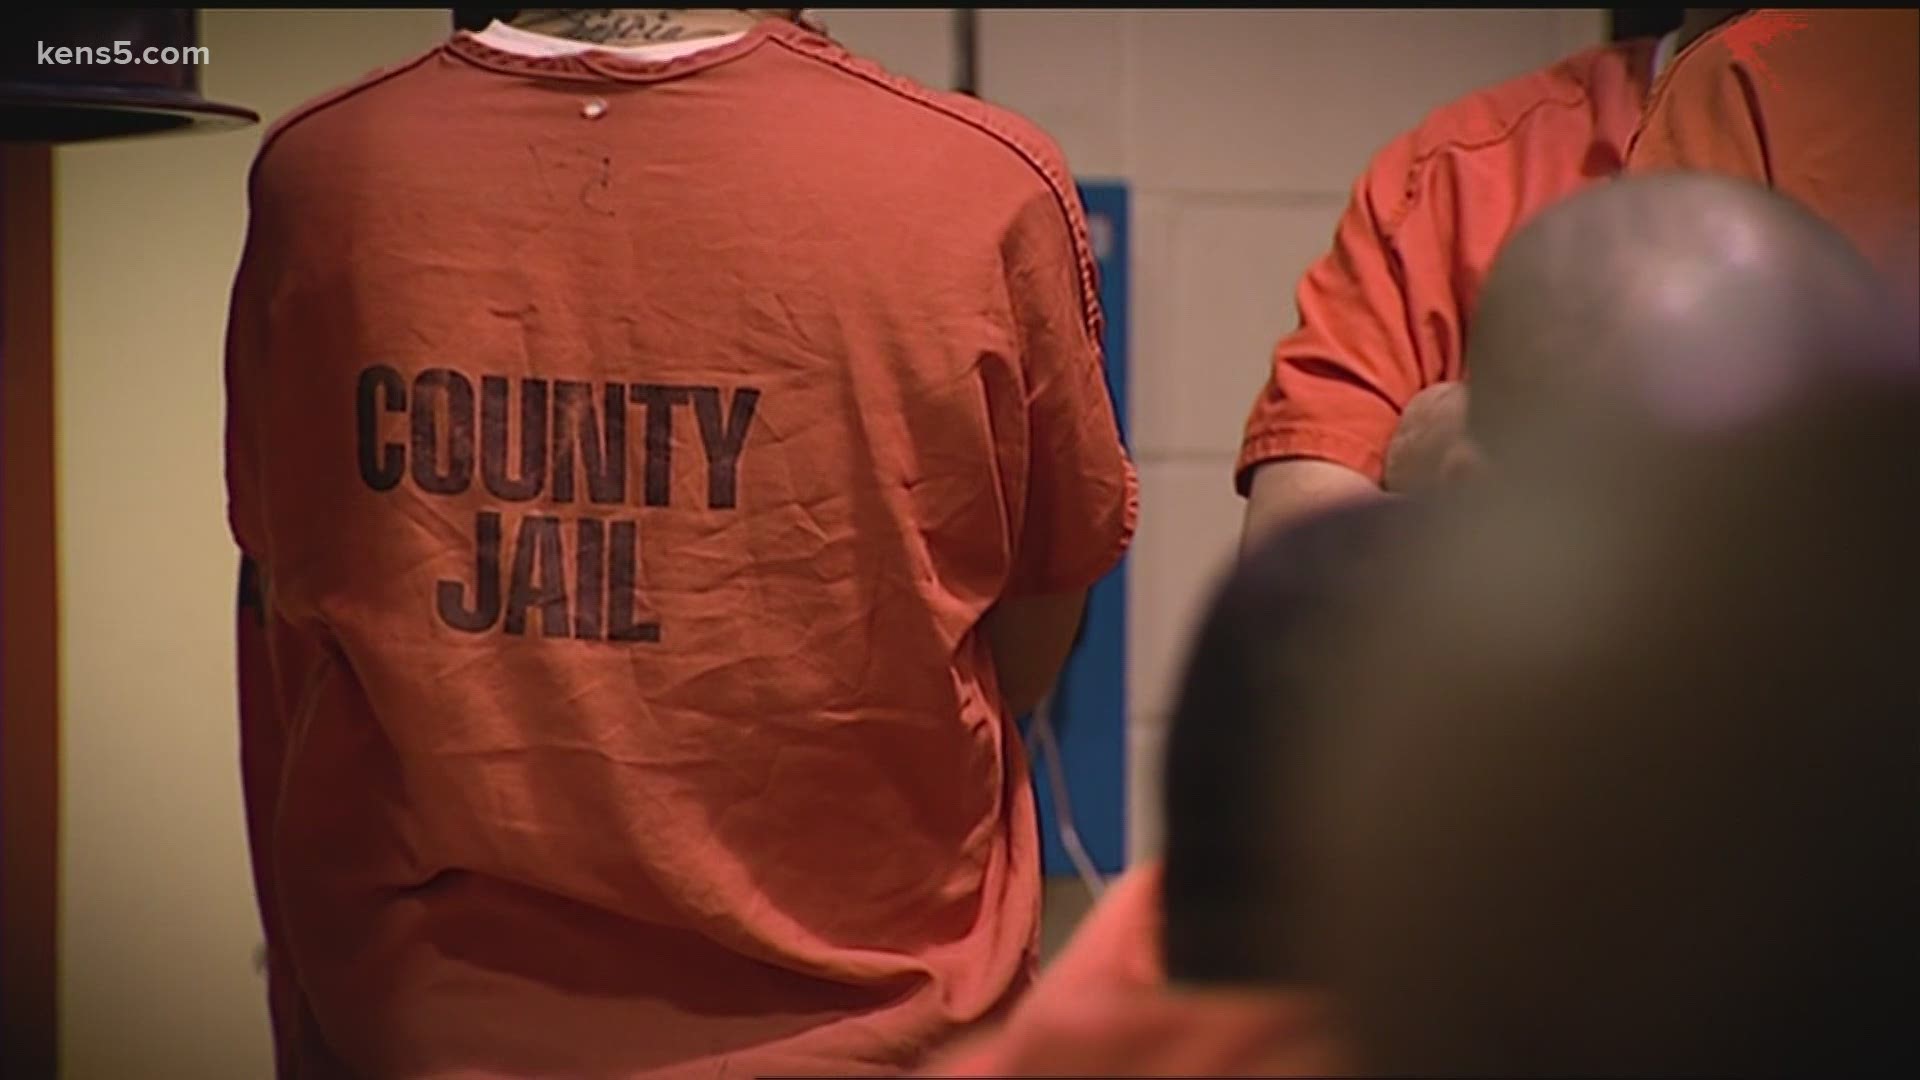 Two men have spent a combined 173 days in the Bexar County jail on allegations they violated their parole elsewhere. But they can't leave to appear in court.